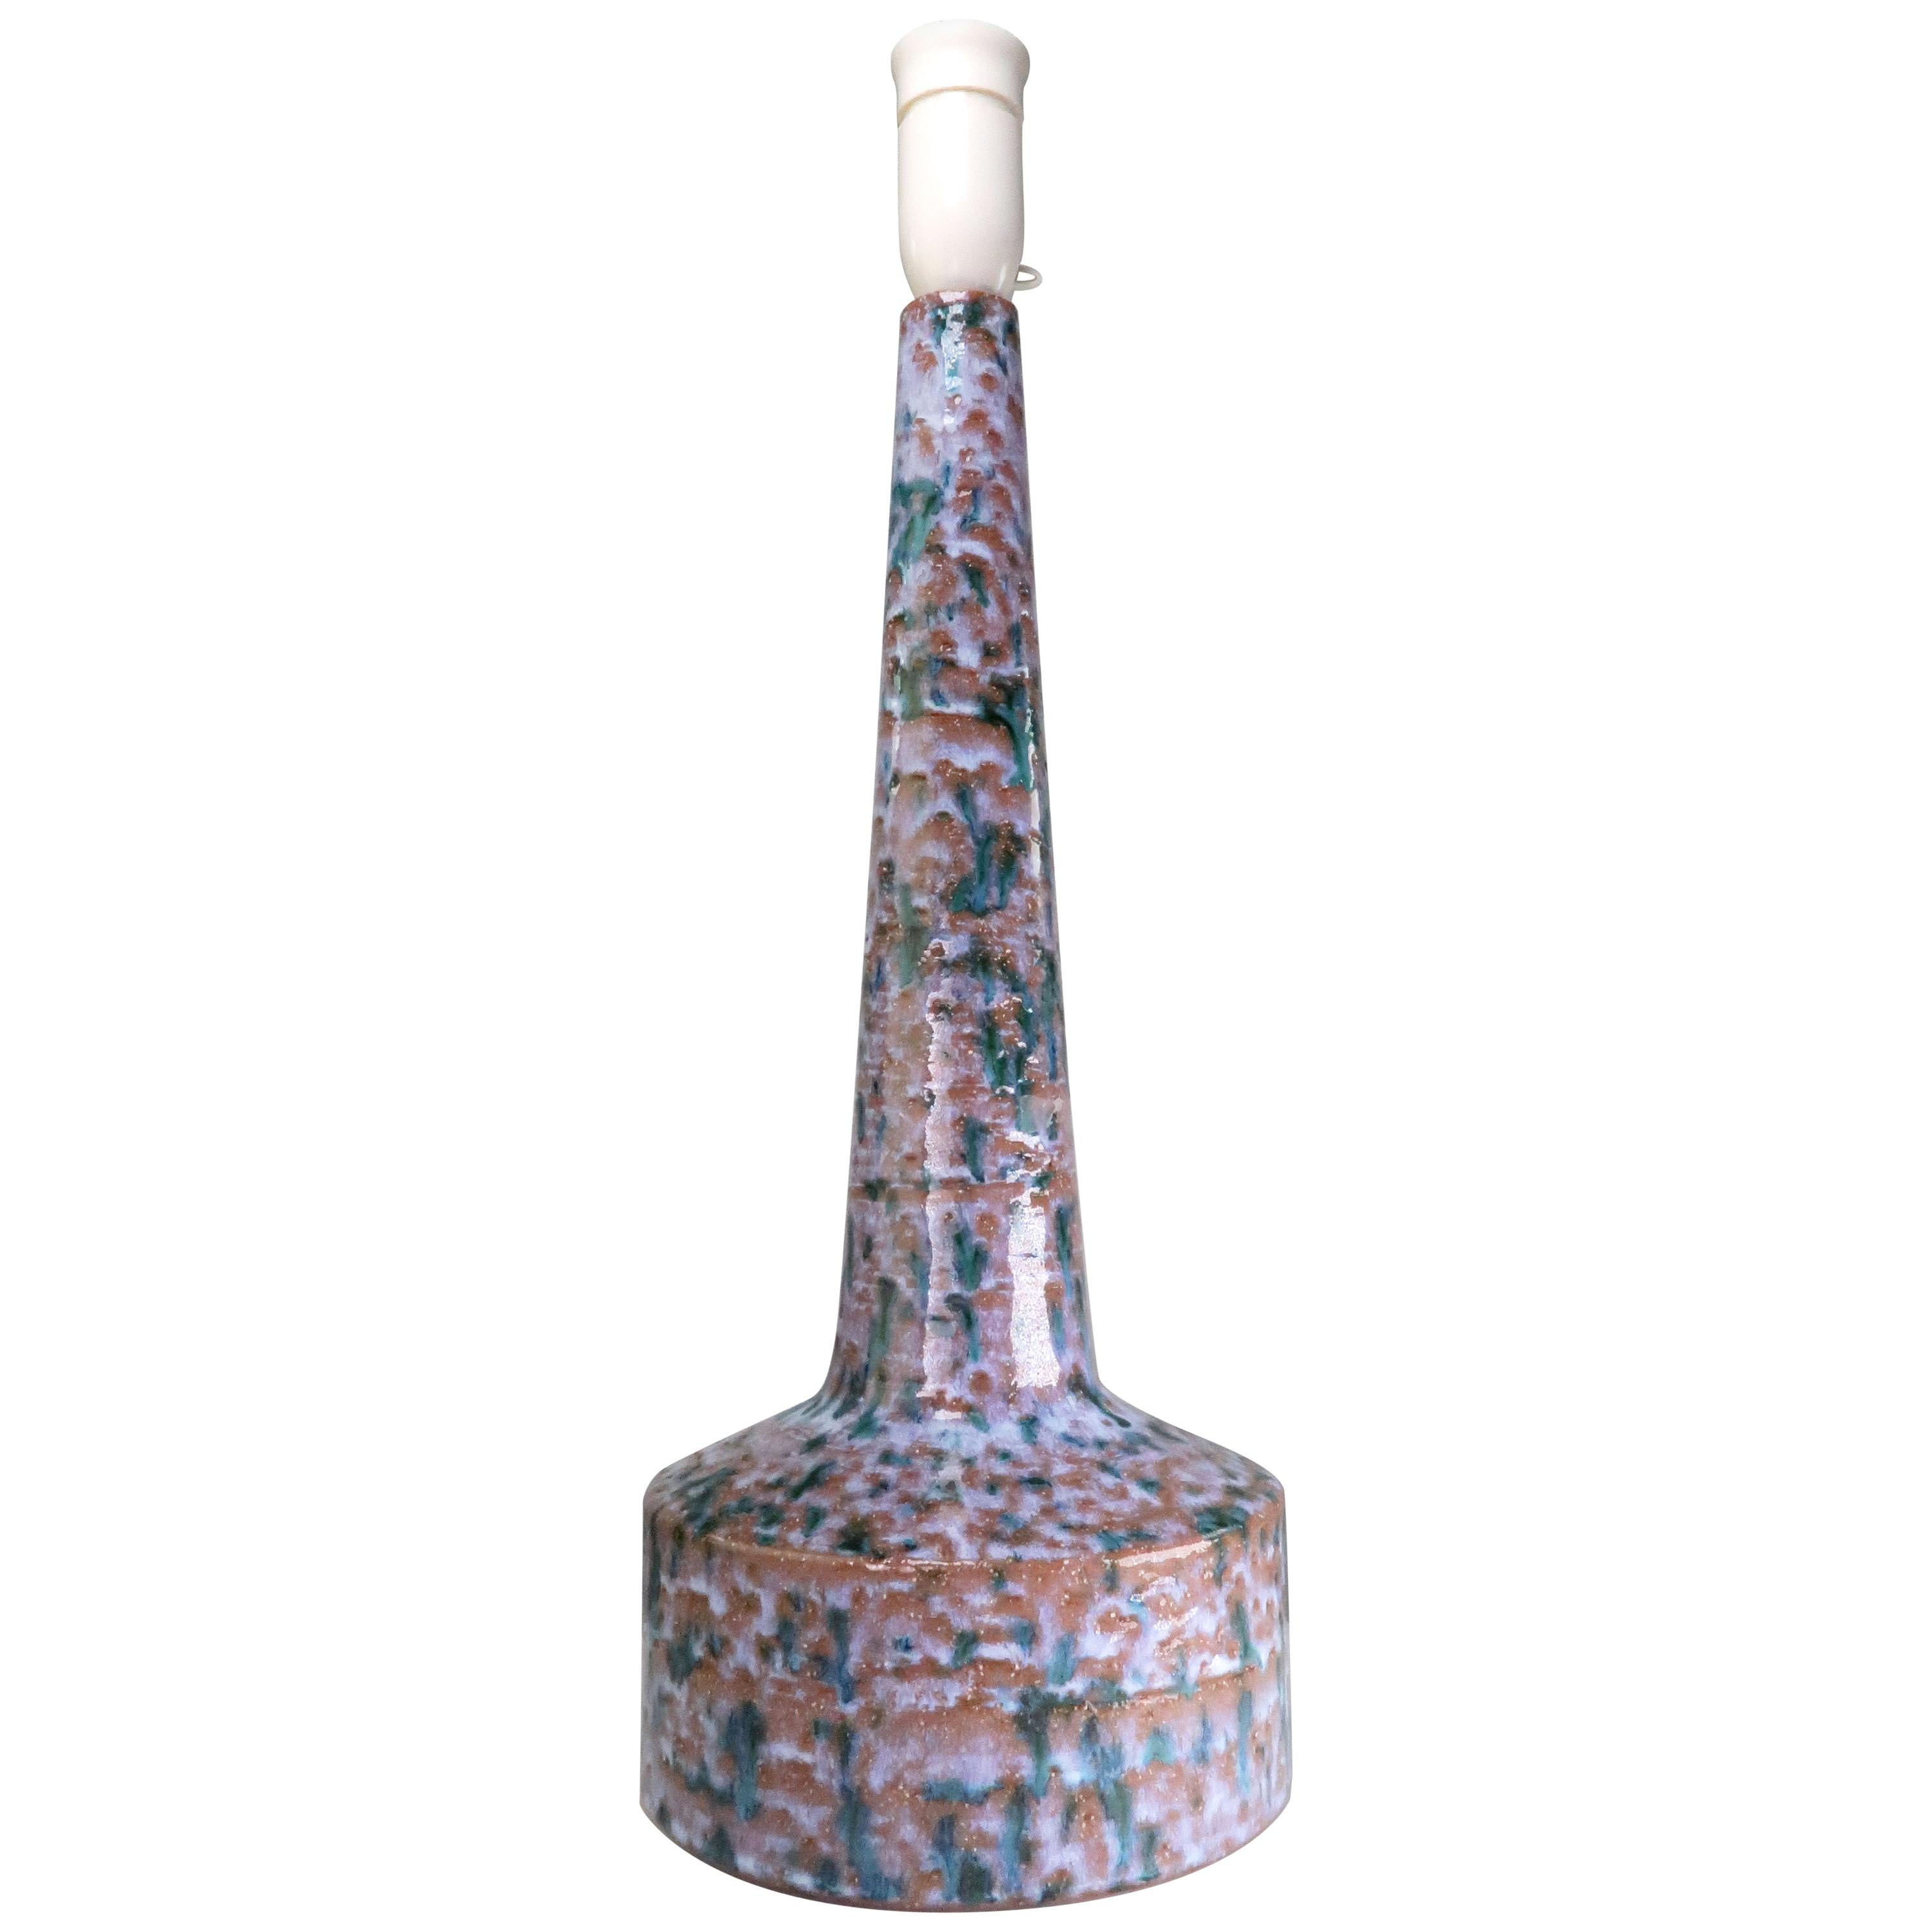 Tall Modernist Multicolored Ceramic Table Lamp, 1971 For Sale